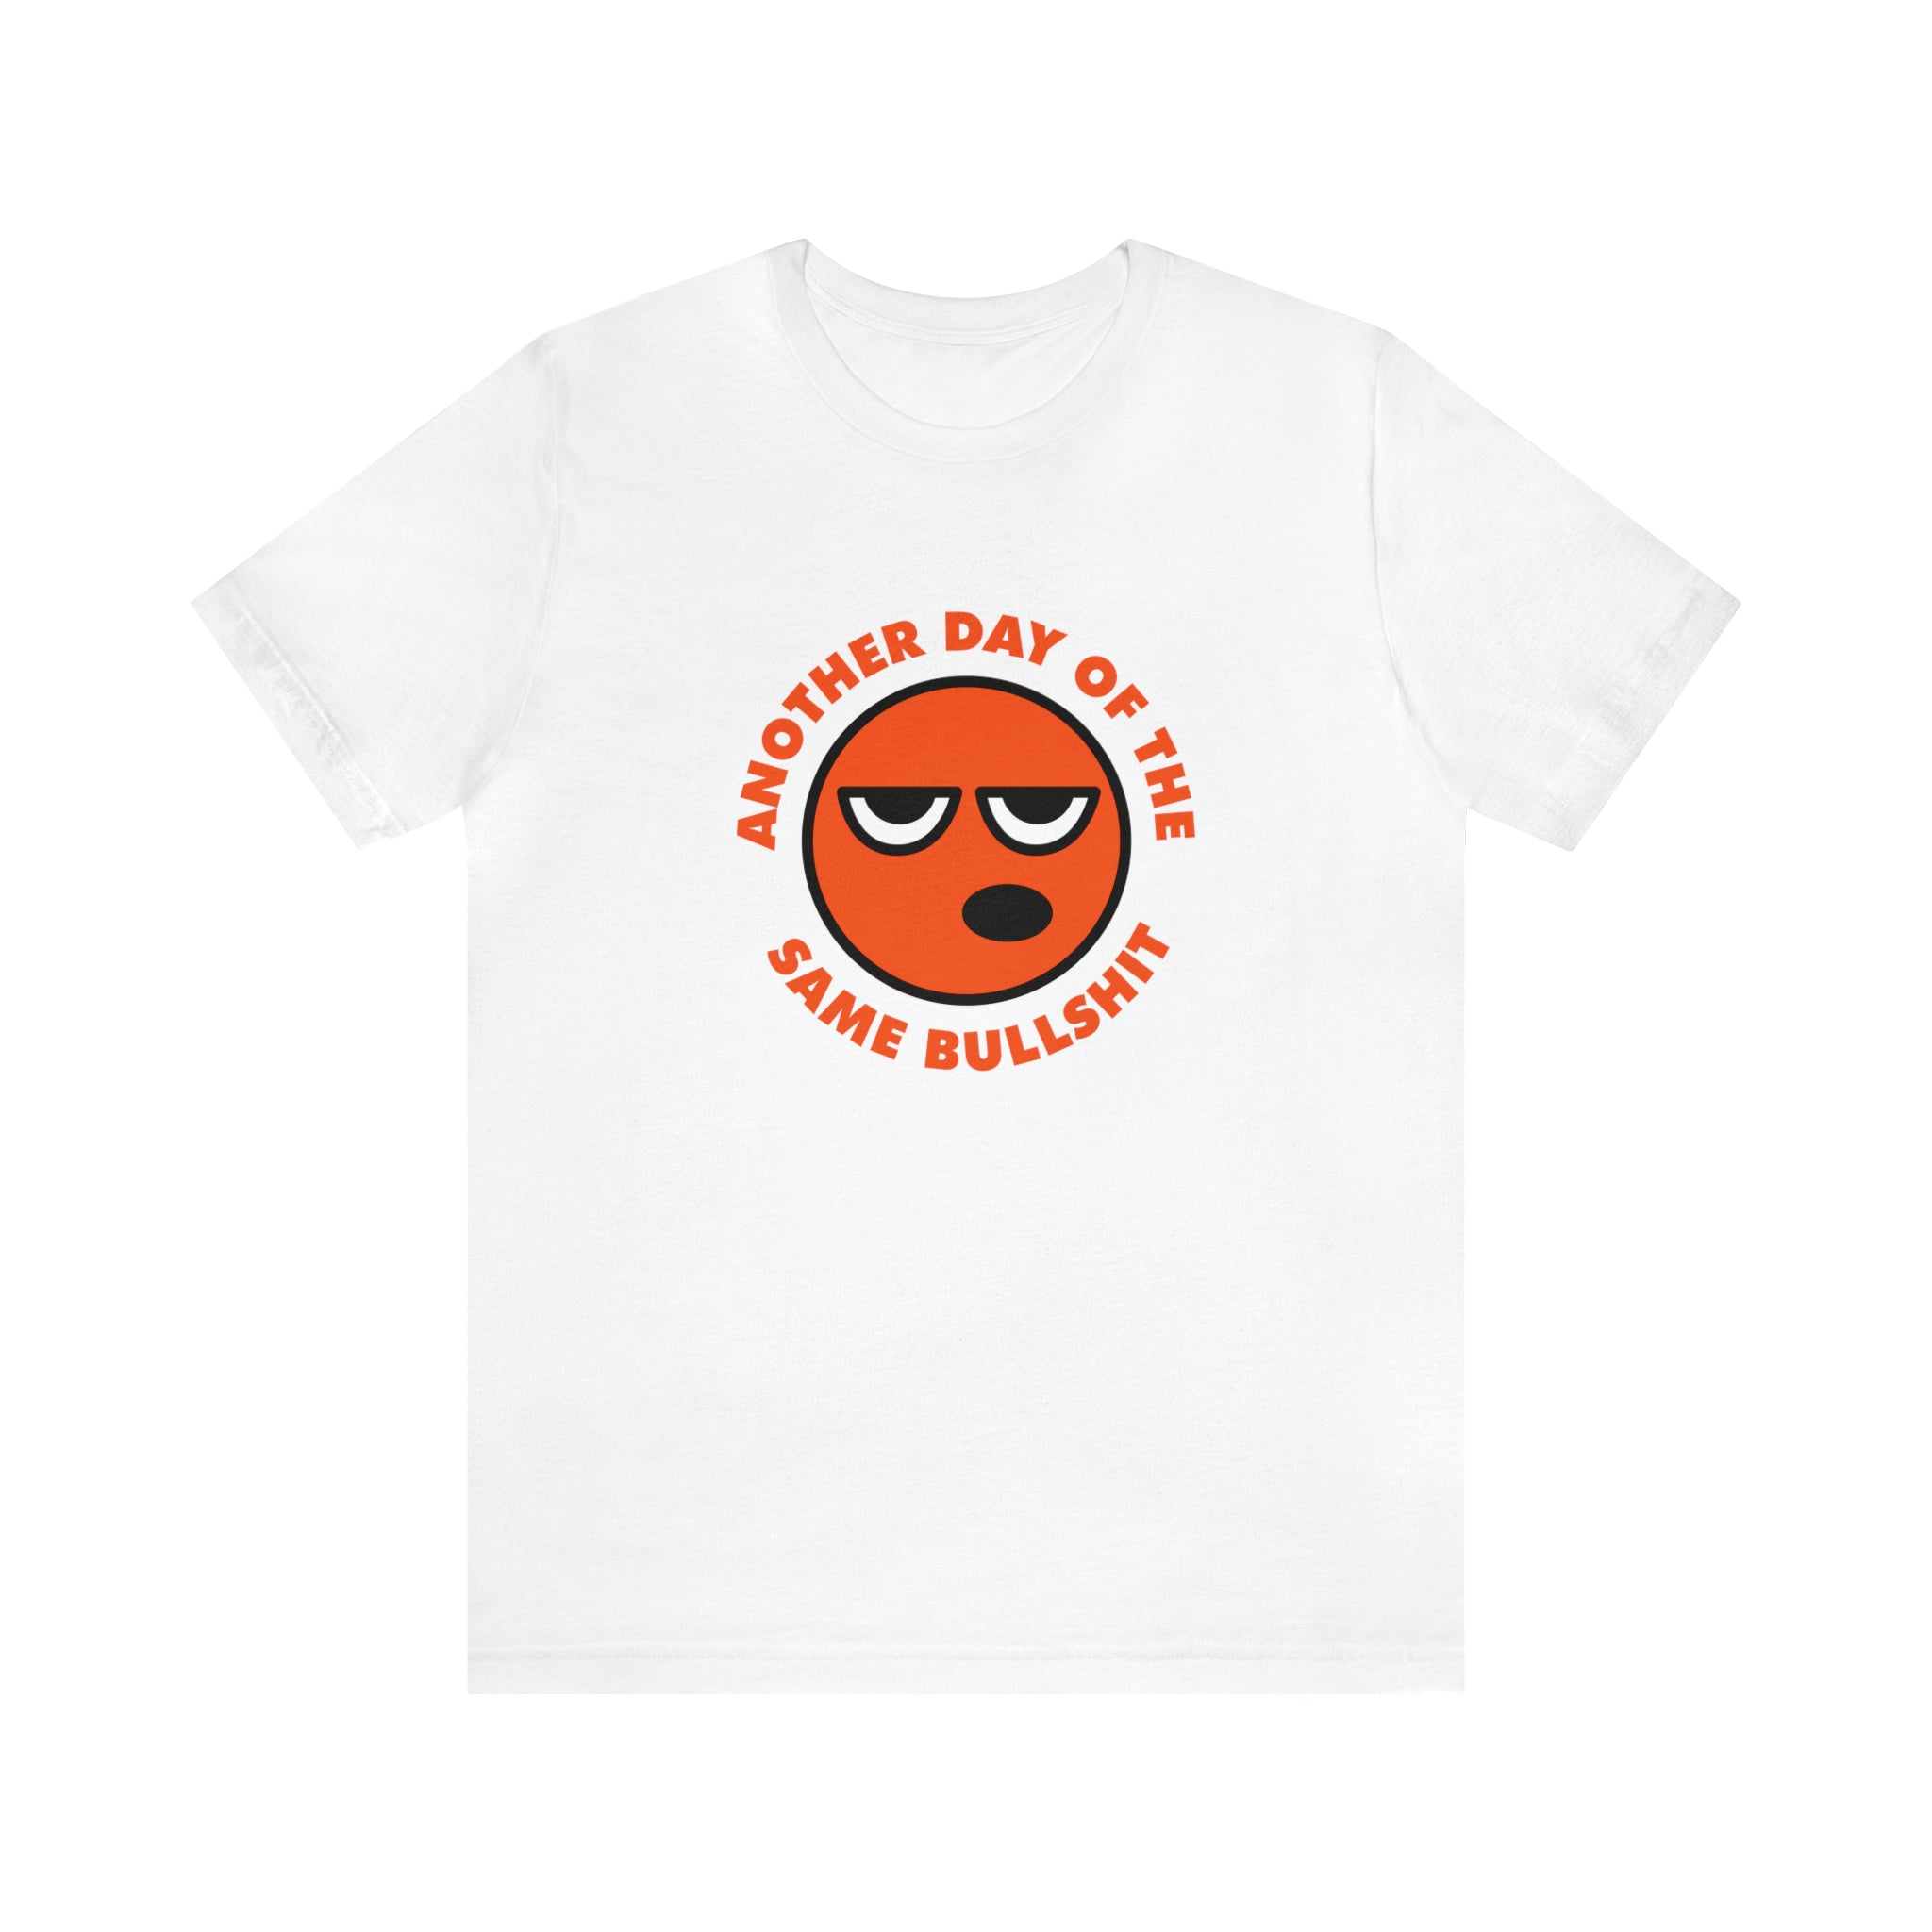 A Another Day of the Same Bullshit T-shirt with an orange emoticon, radiating comfort and attitude.